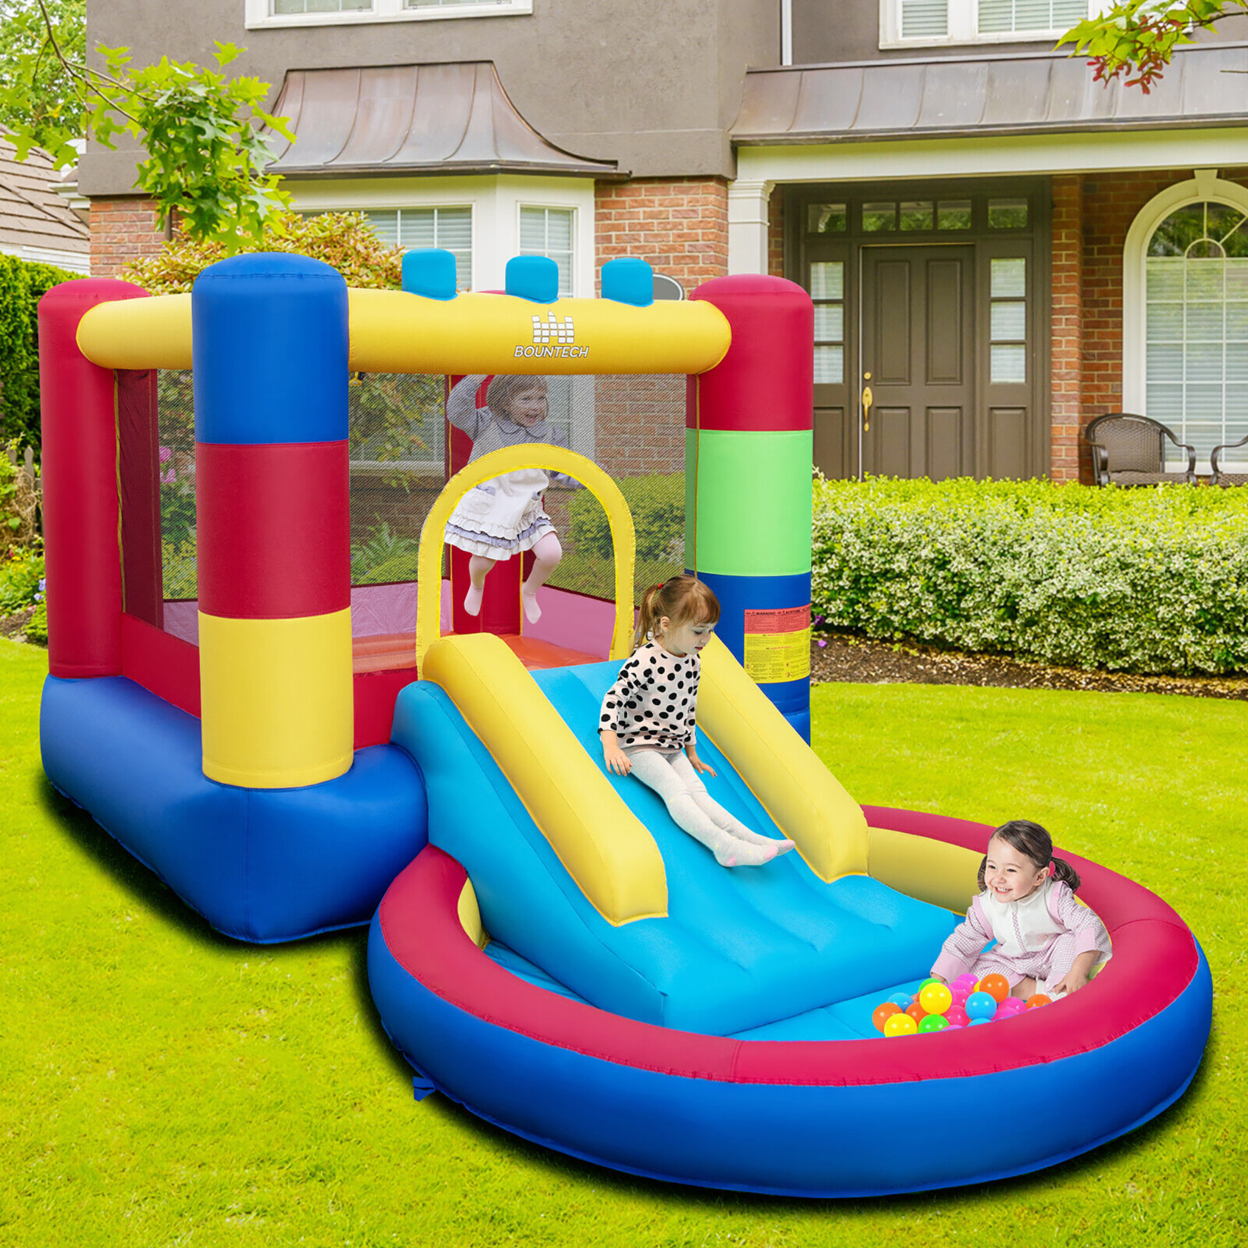 4-in-1 Inflatable Bounce House Colorful Kids Bouncy W/ Ocean Balls & 480W Blower